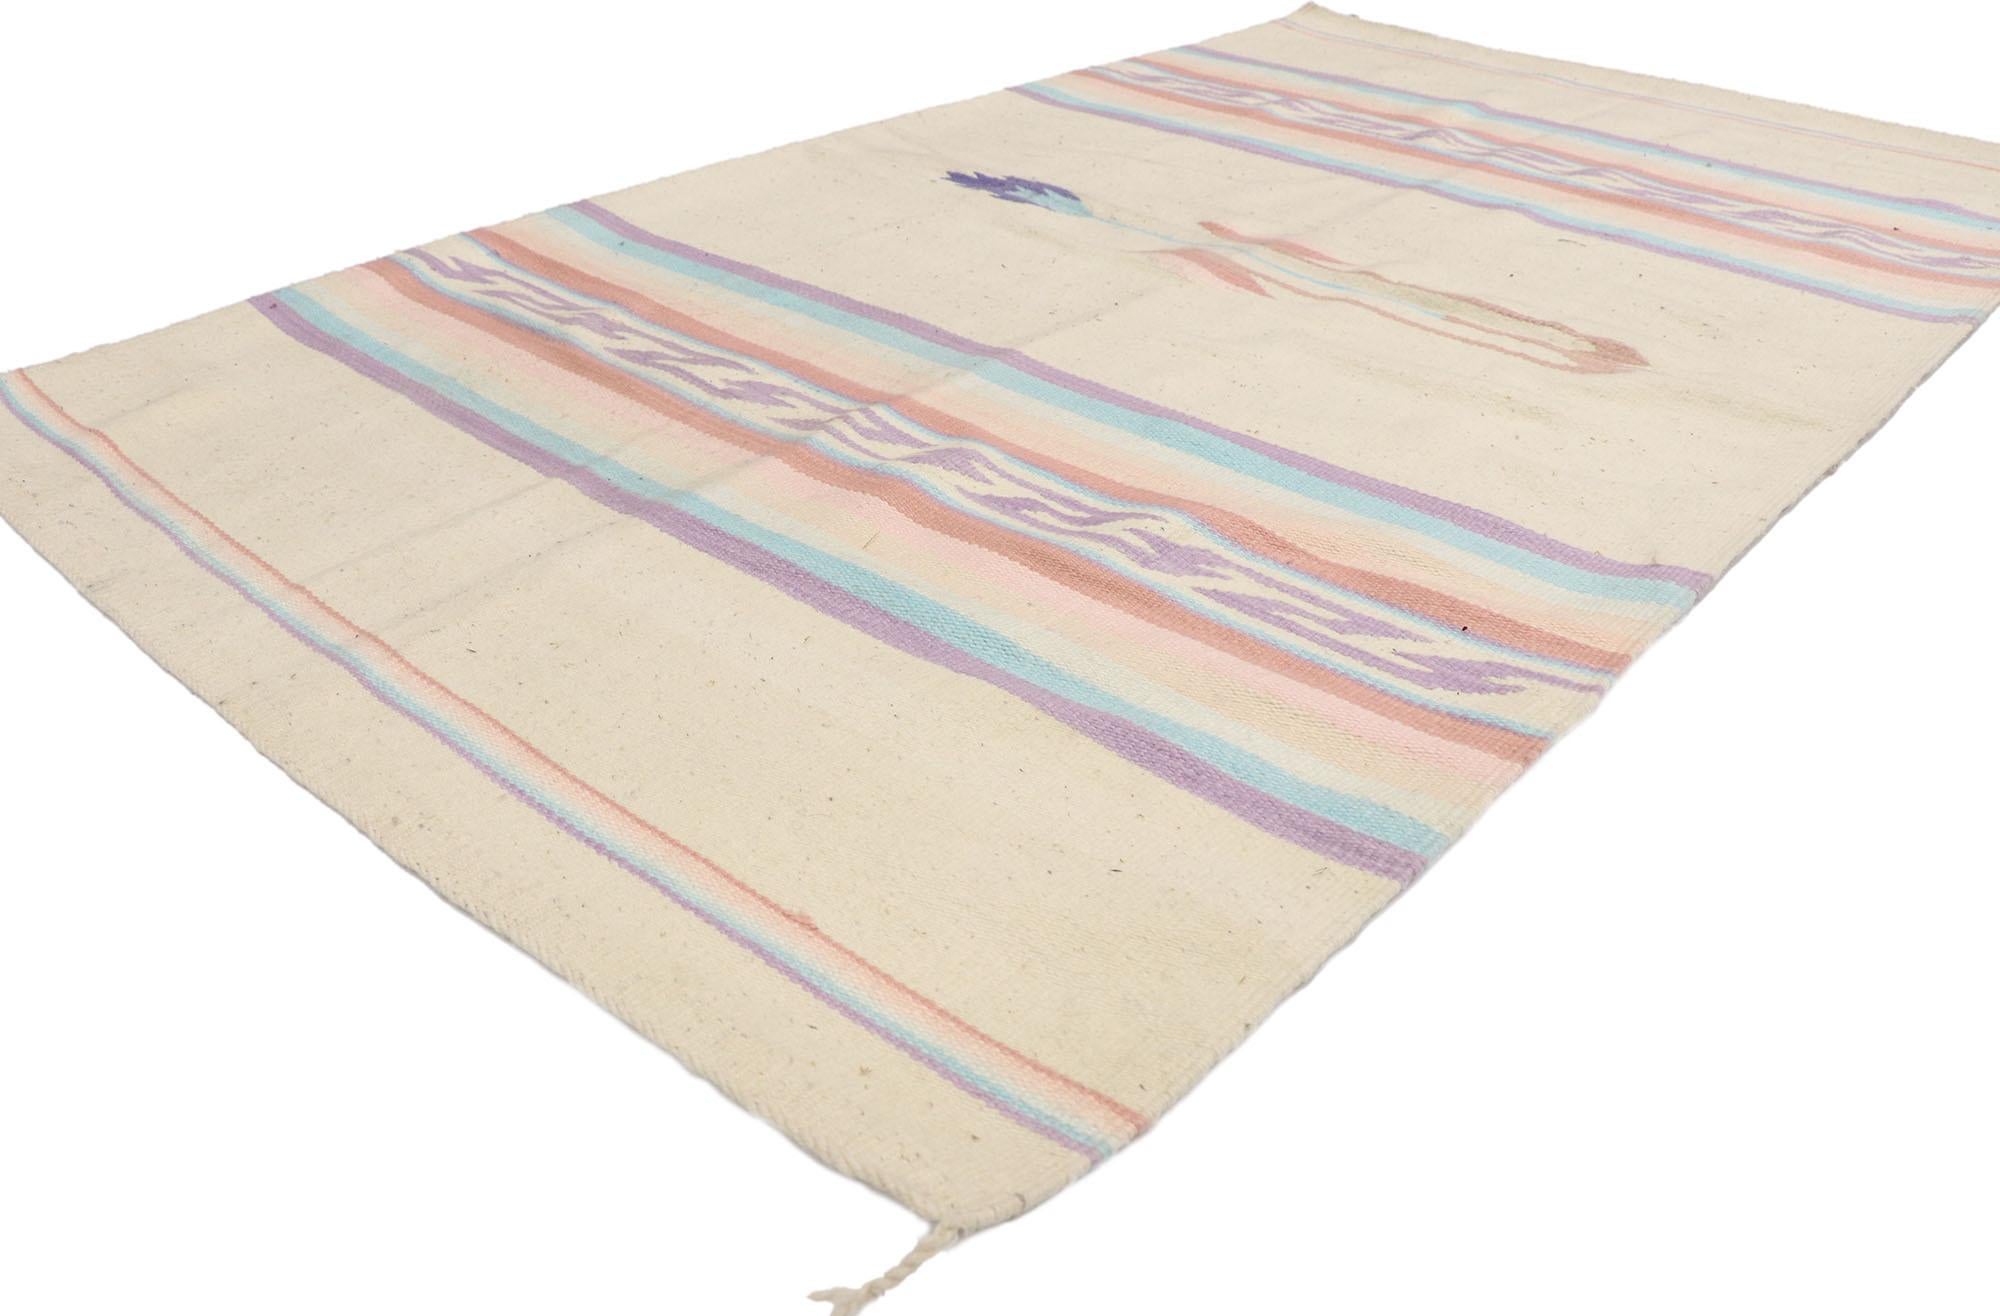 77999 vintage chinle Navajo Kilim rug Southwestern Bohemian Style 04'02 x 07'02. Full of history with woven tales and effortless beauty, this hand woven wool vintage Navajo kilim rug beautifully embodies a southwestern bohemian tribal style. The